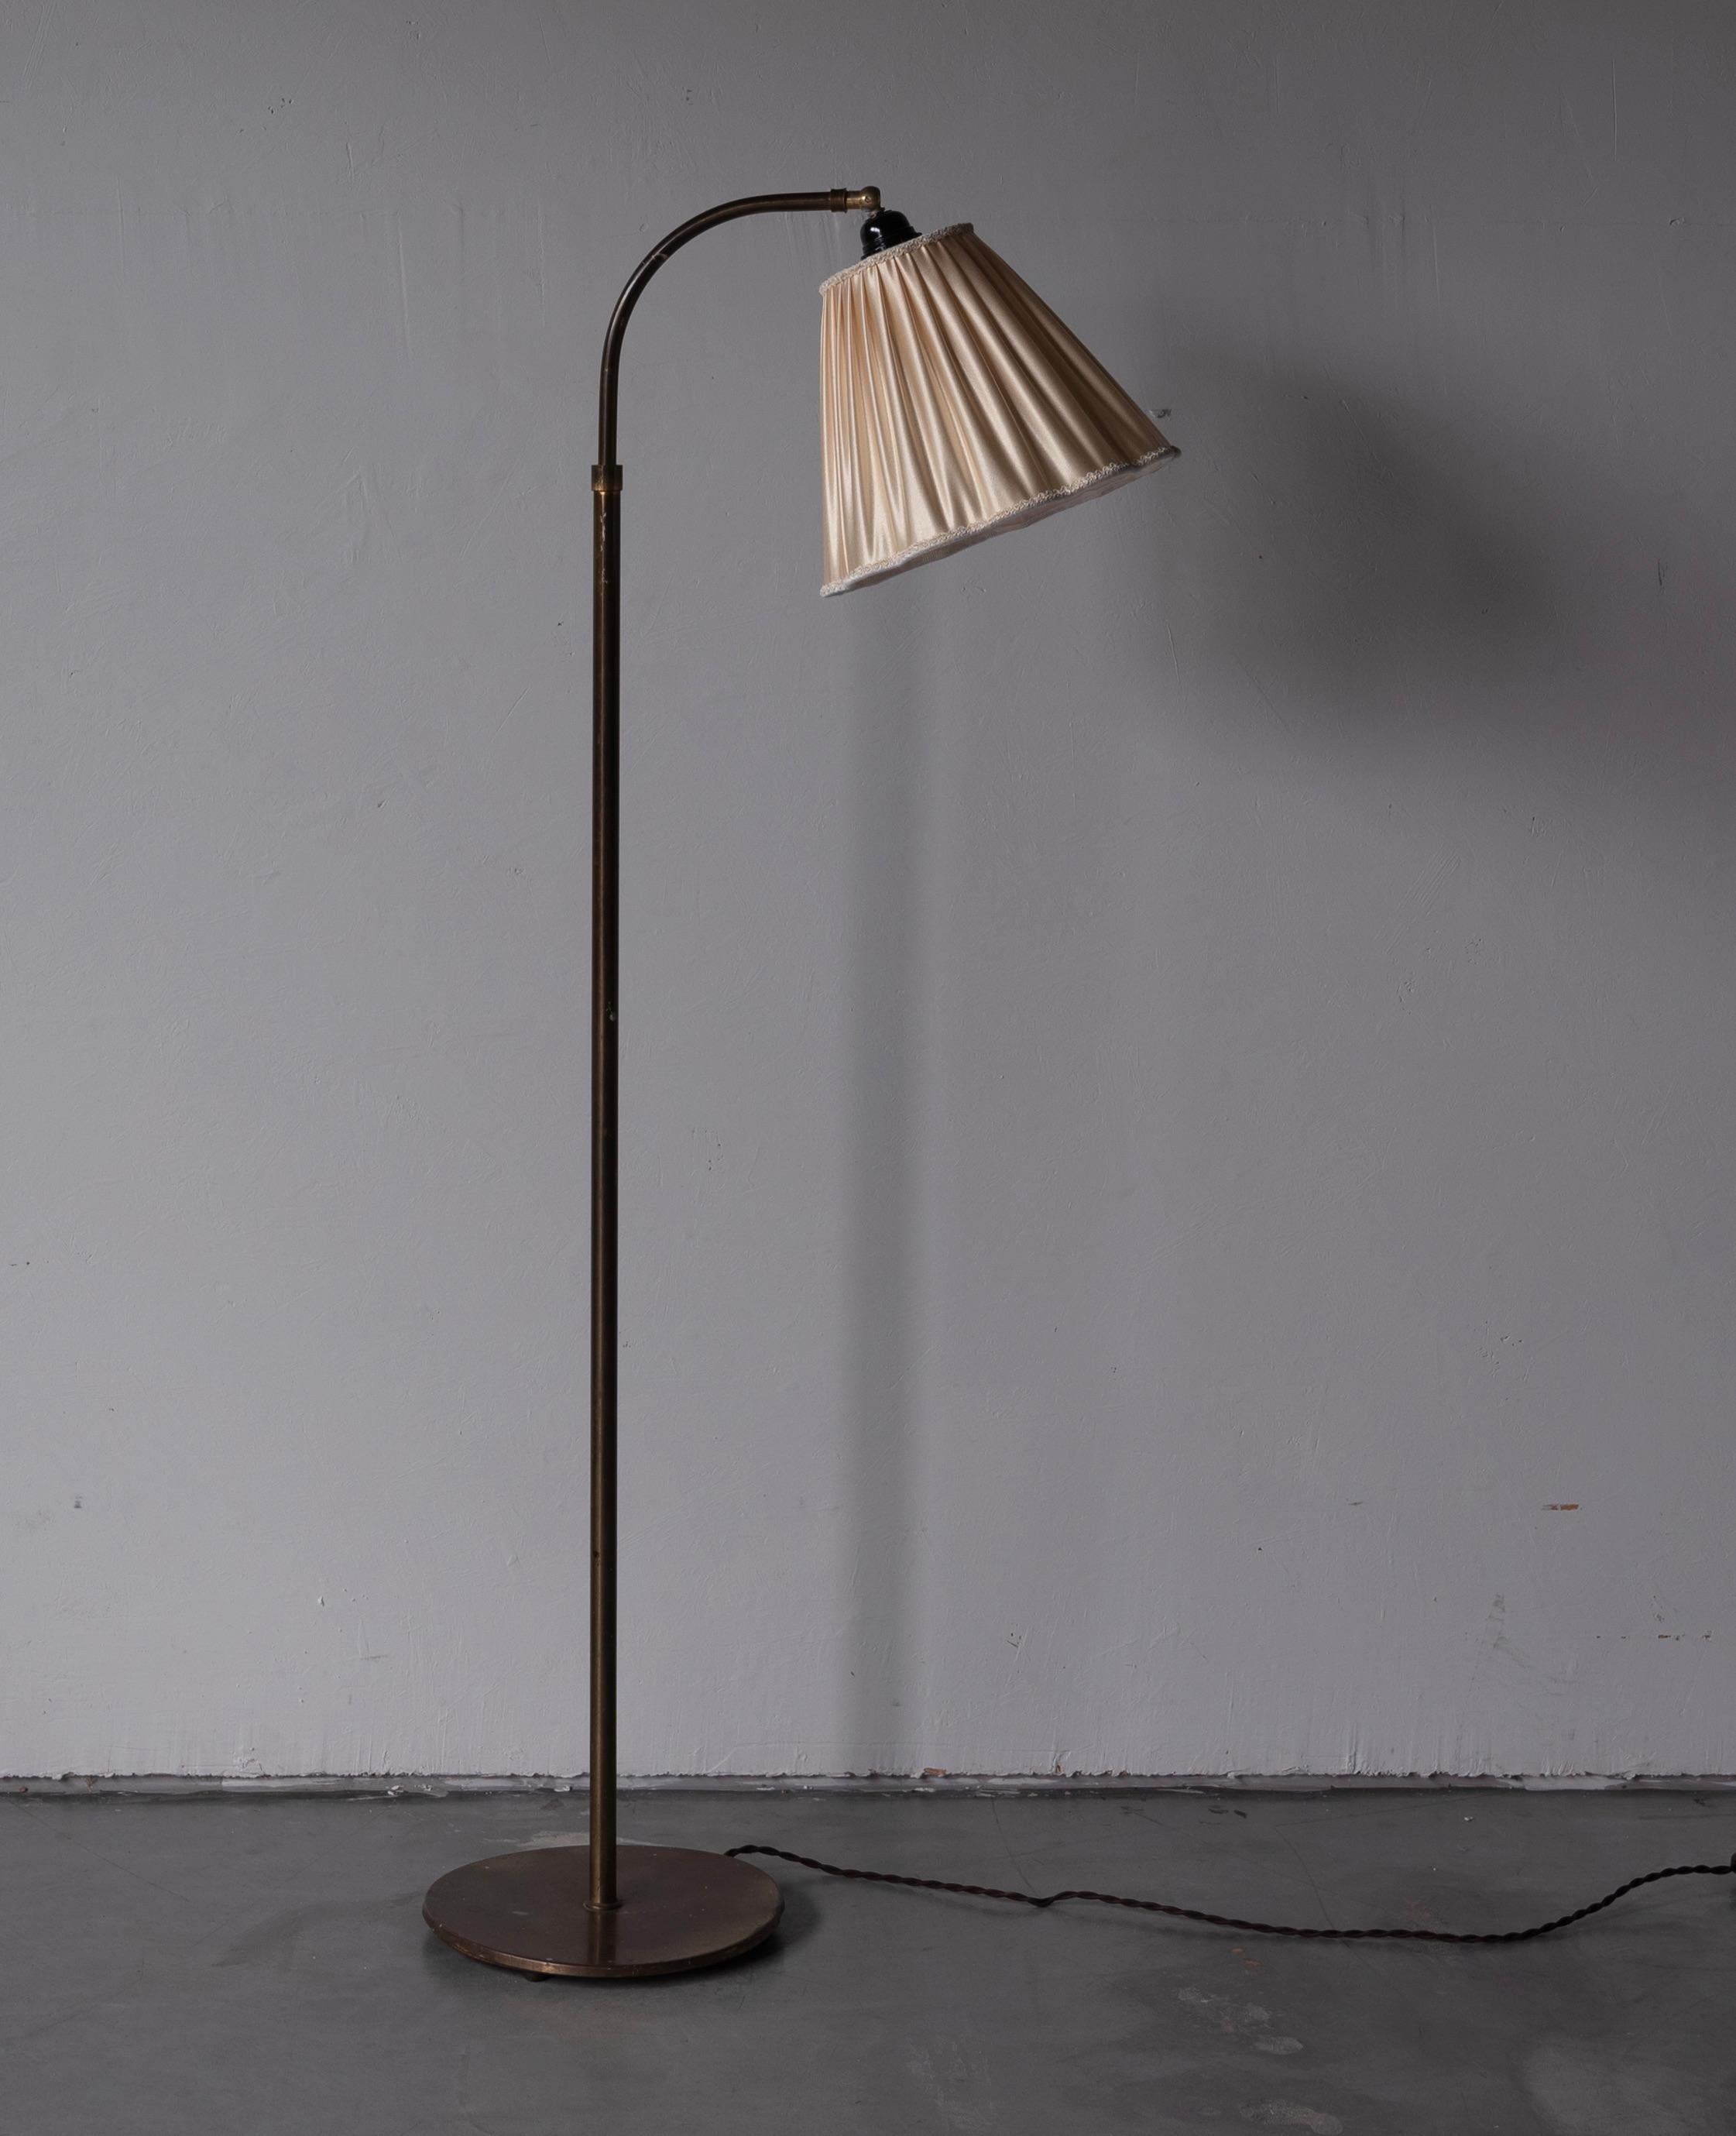 A functionalist wall light / task light, designed and produced in Denmark, 1940s. Features brass. Brand new lampshade.

Stated dimensions with lampshade attached as is illustrated in the primary image.